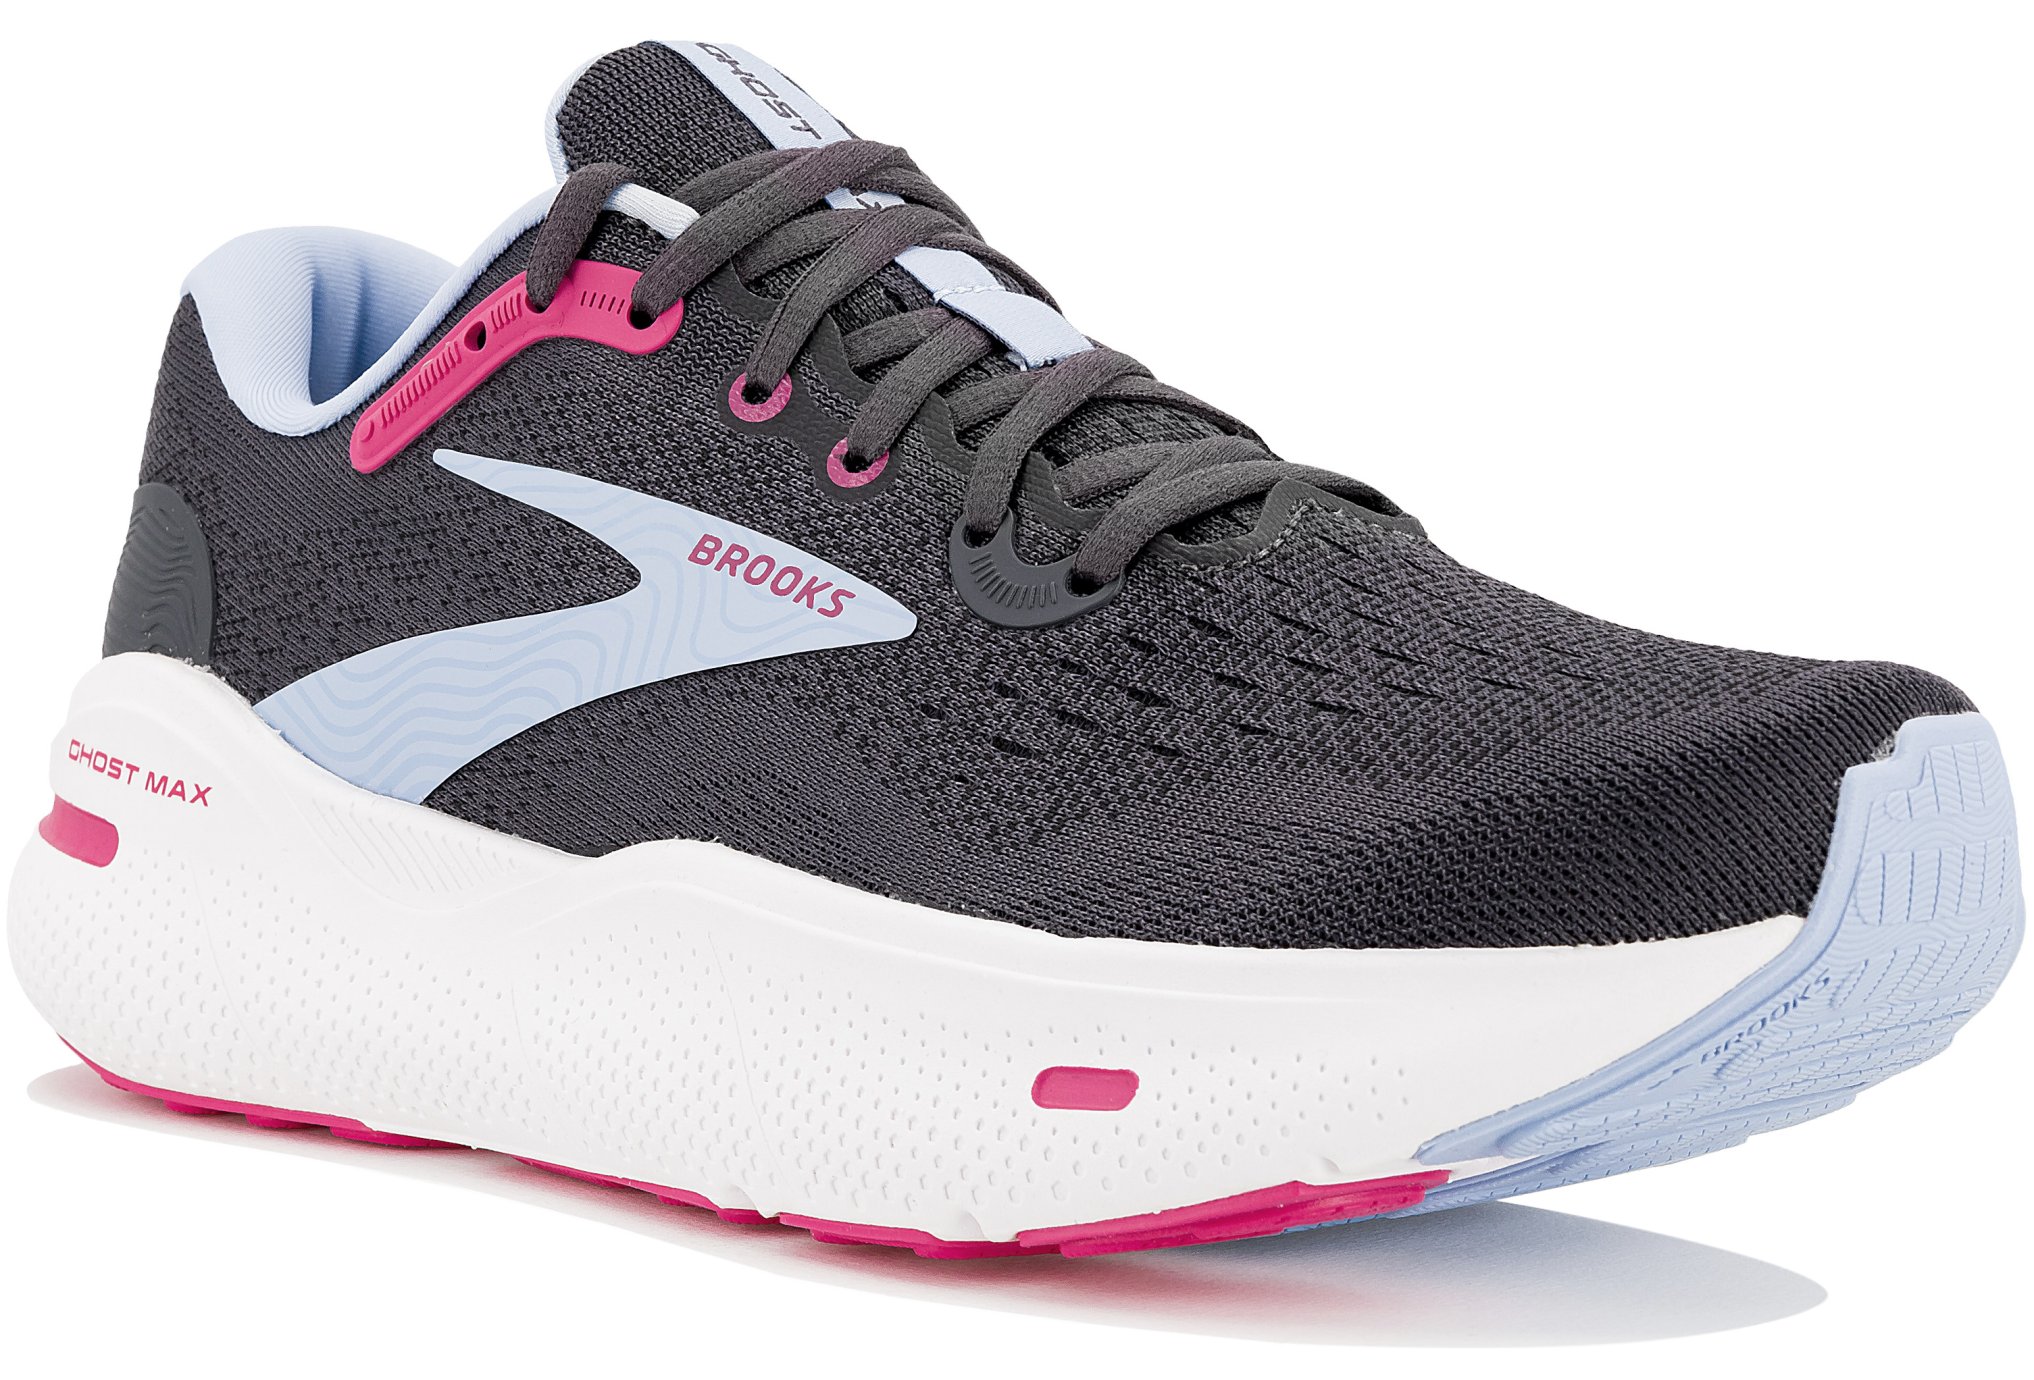 Brooks Ghost Max W Chaussures running femme